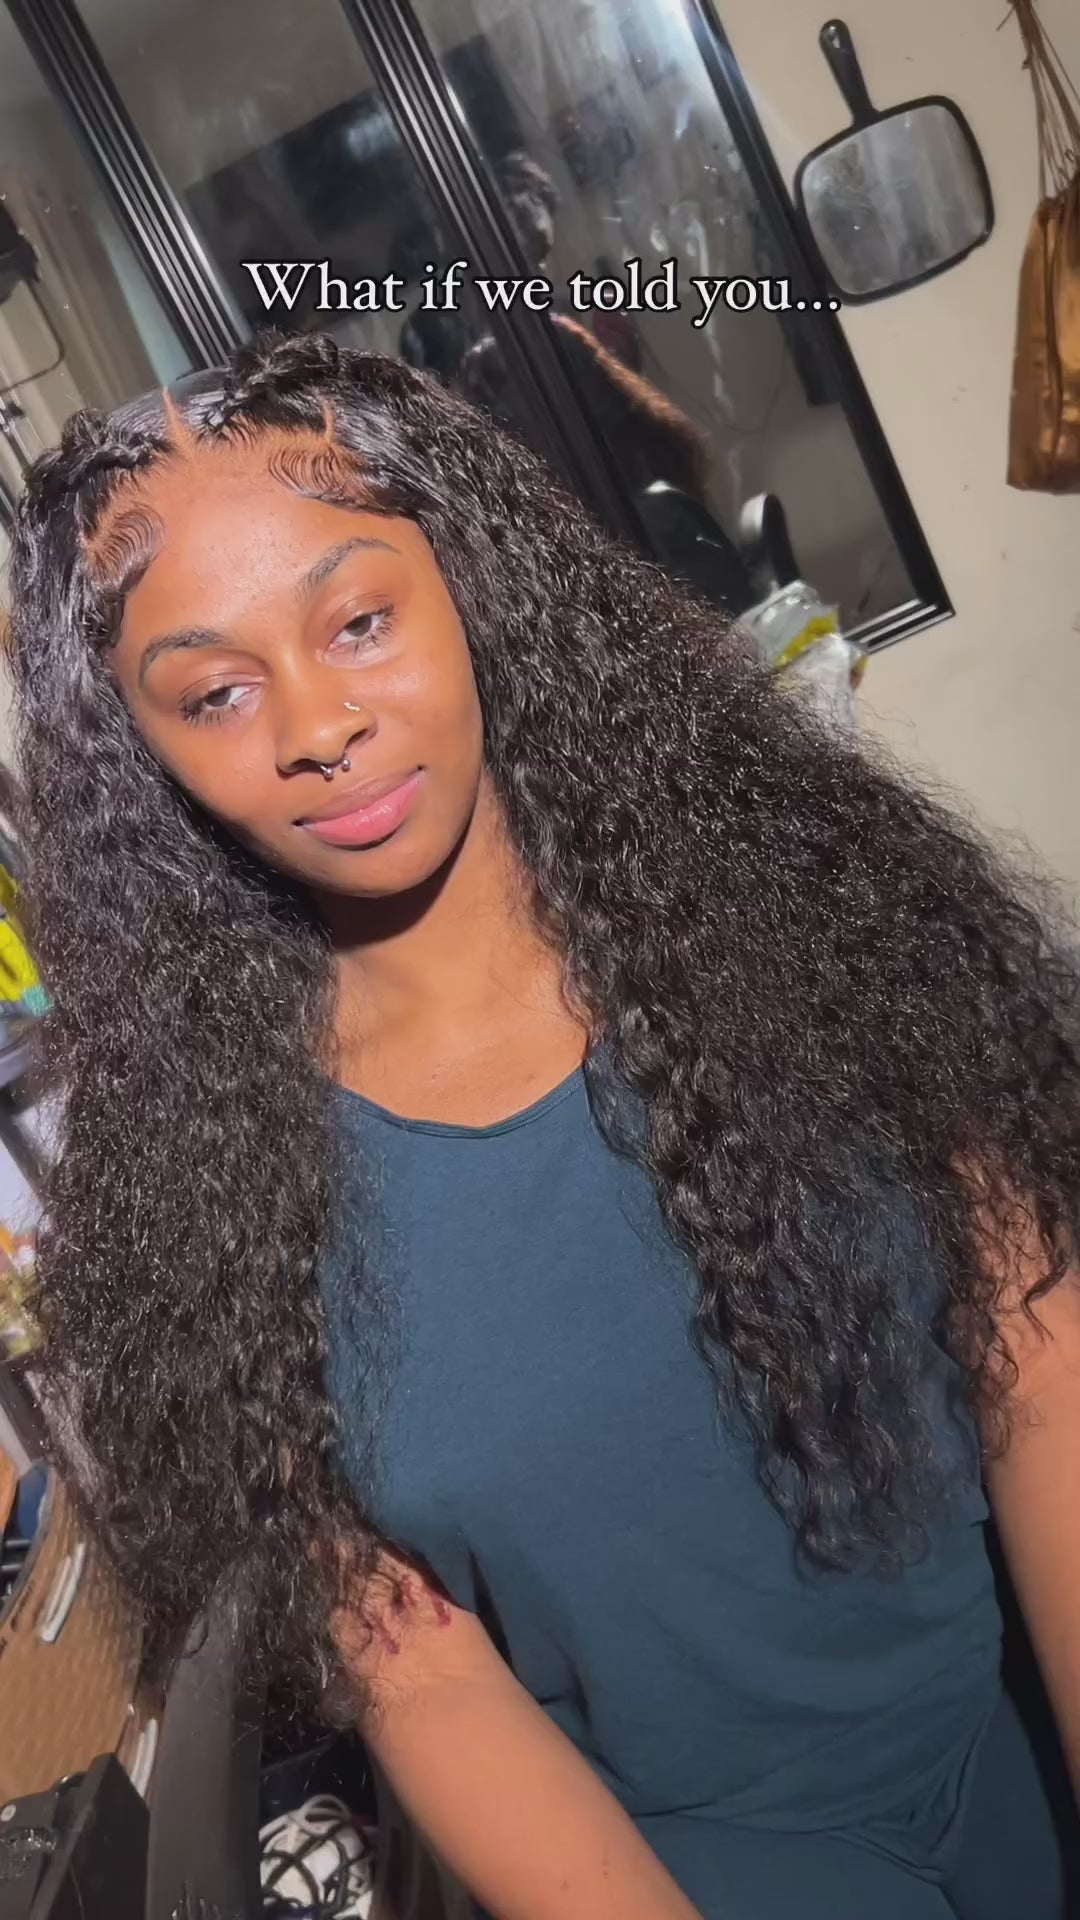 Water Wave 13x6 Glueless HD Lace Front Wigs Pre Plucked Pre Bleached Upgrade Put On And Go